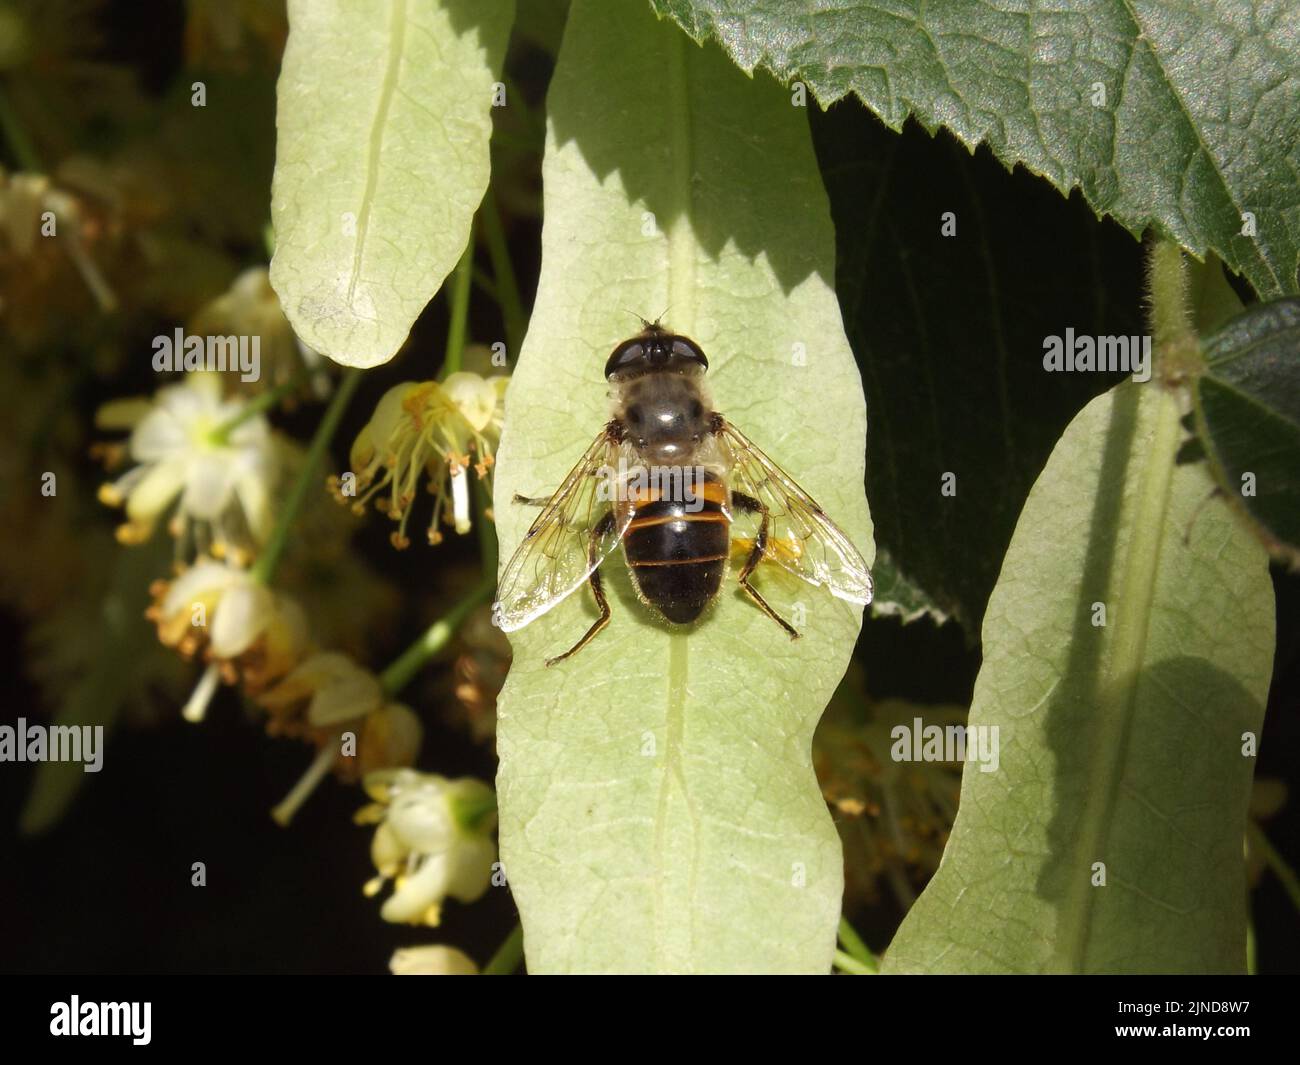 A honey bee is standing on a leaf of a linden tree. A honey bee on a sunlit leaf of a linden tree. Stock Photo